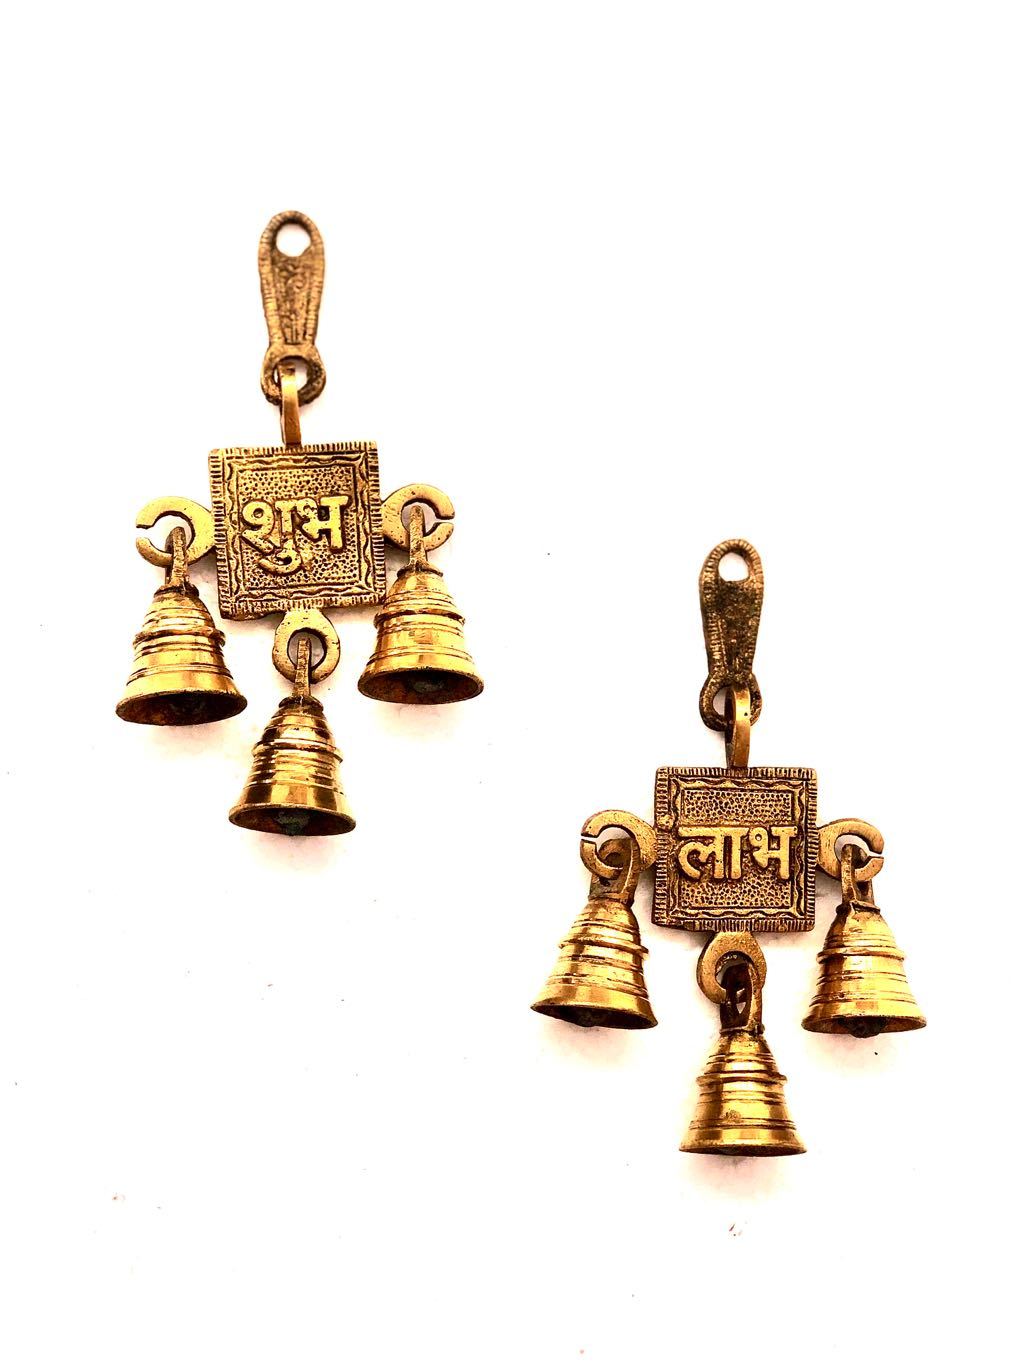 Shubh Labh Brass Wall Decor Unique Hanging Temple Room Tamrapatra - Tamrapatra